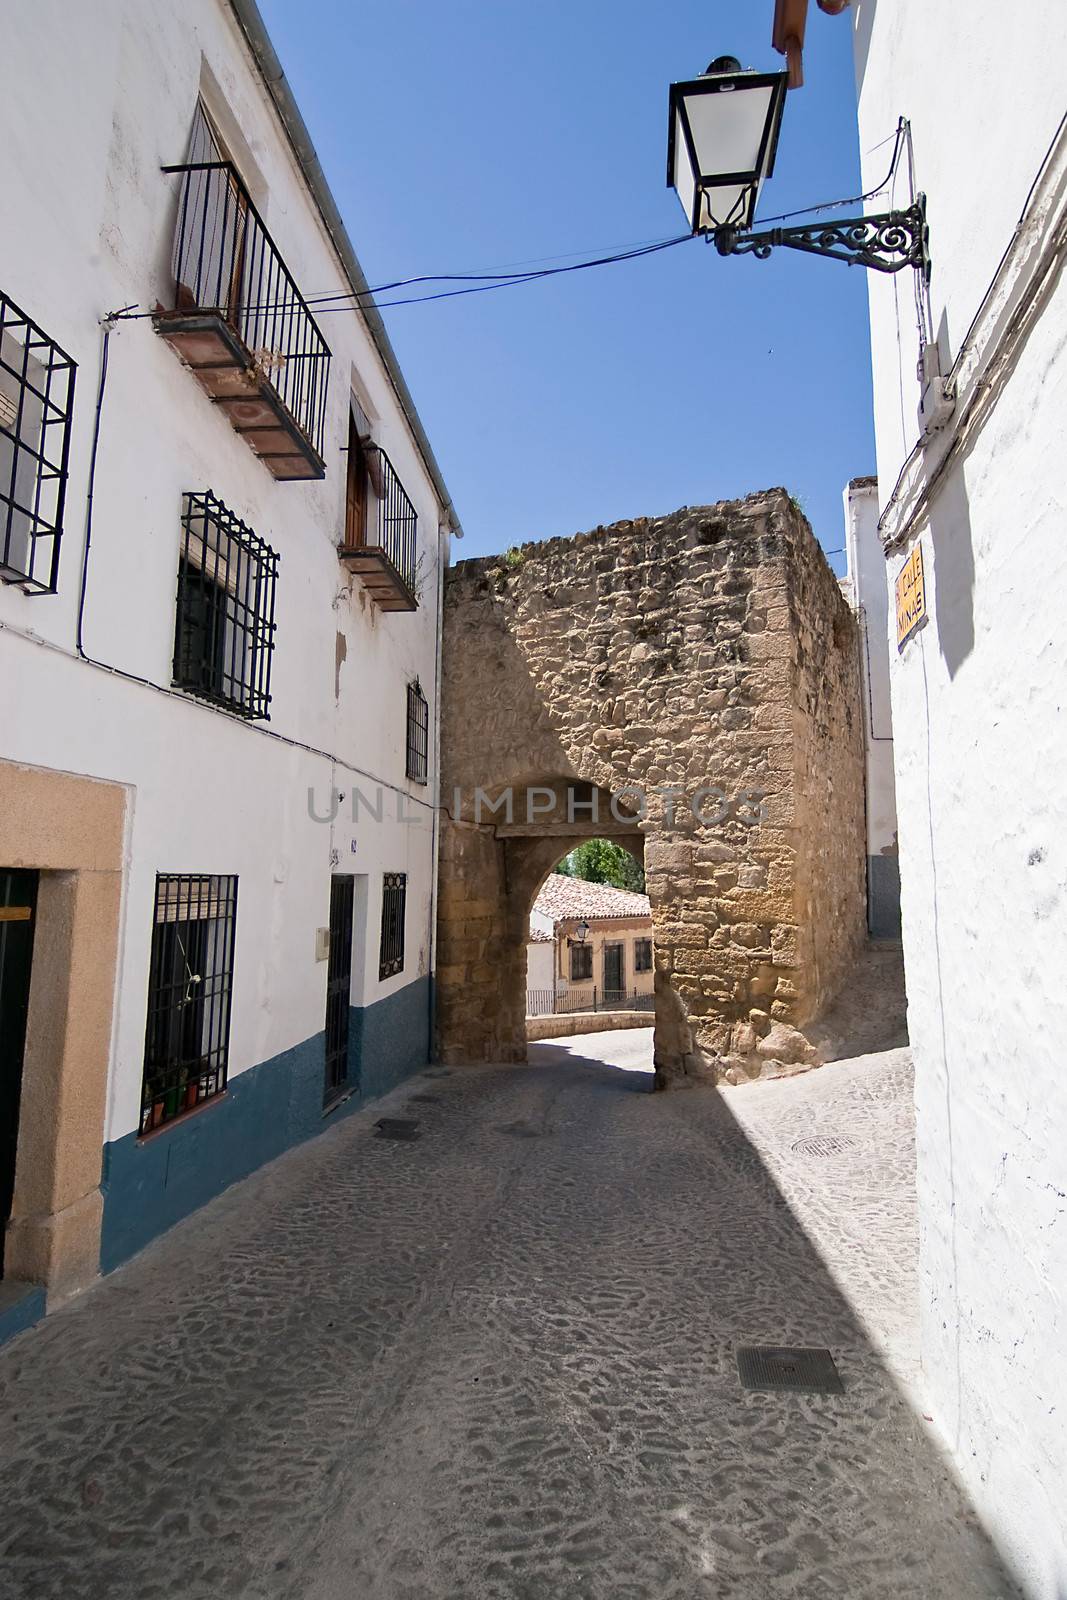 Mudejar door to the village at the end of the street,  Sabiote, Jaen province, Andalusia, Spain